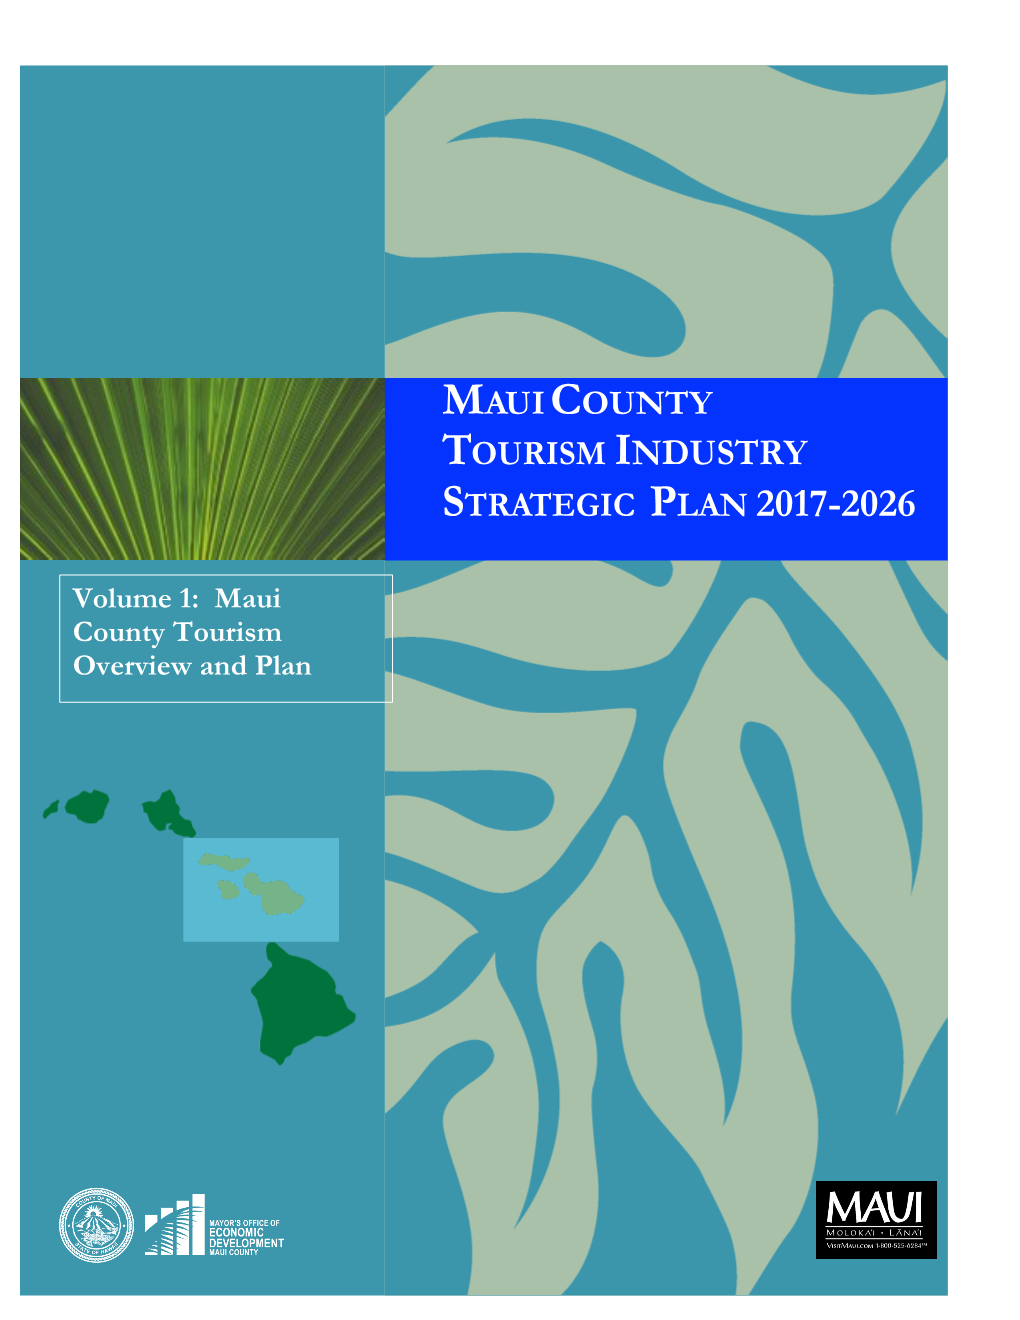 Maui County Tourism Industry Strategic Plan 2017-2026 Maui County Tourism Industry Strategic Plan 2017-2026